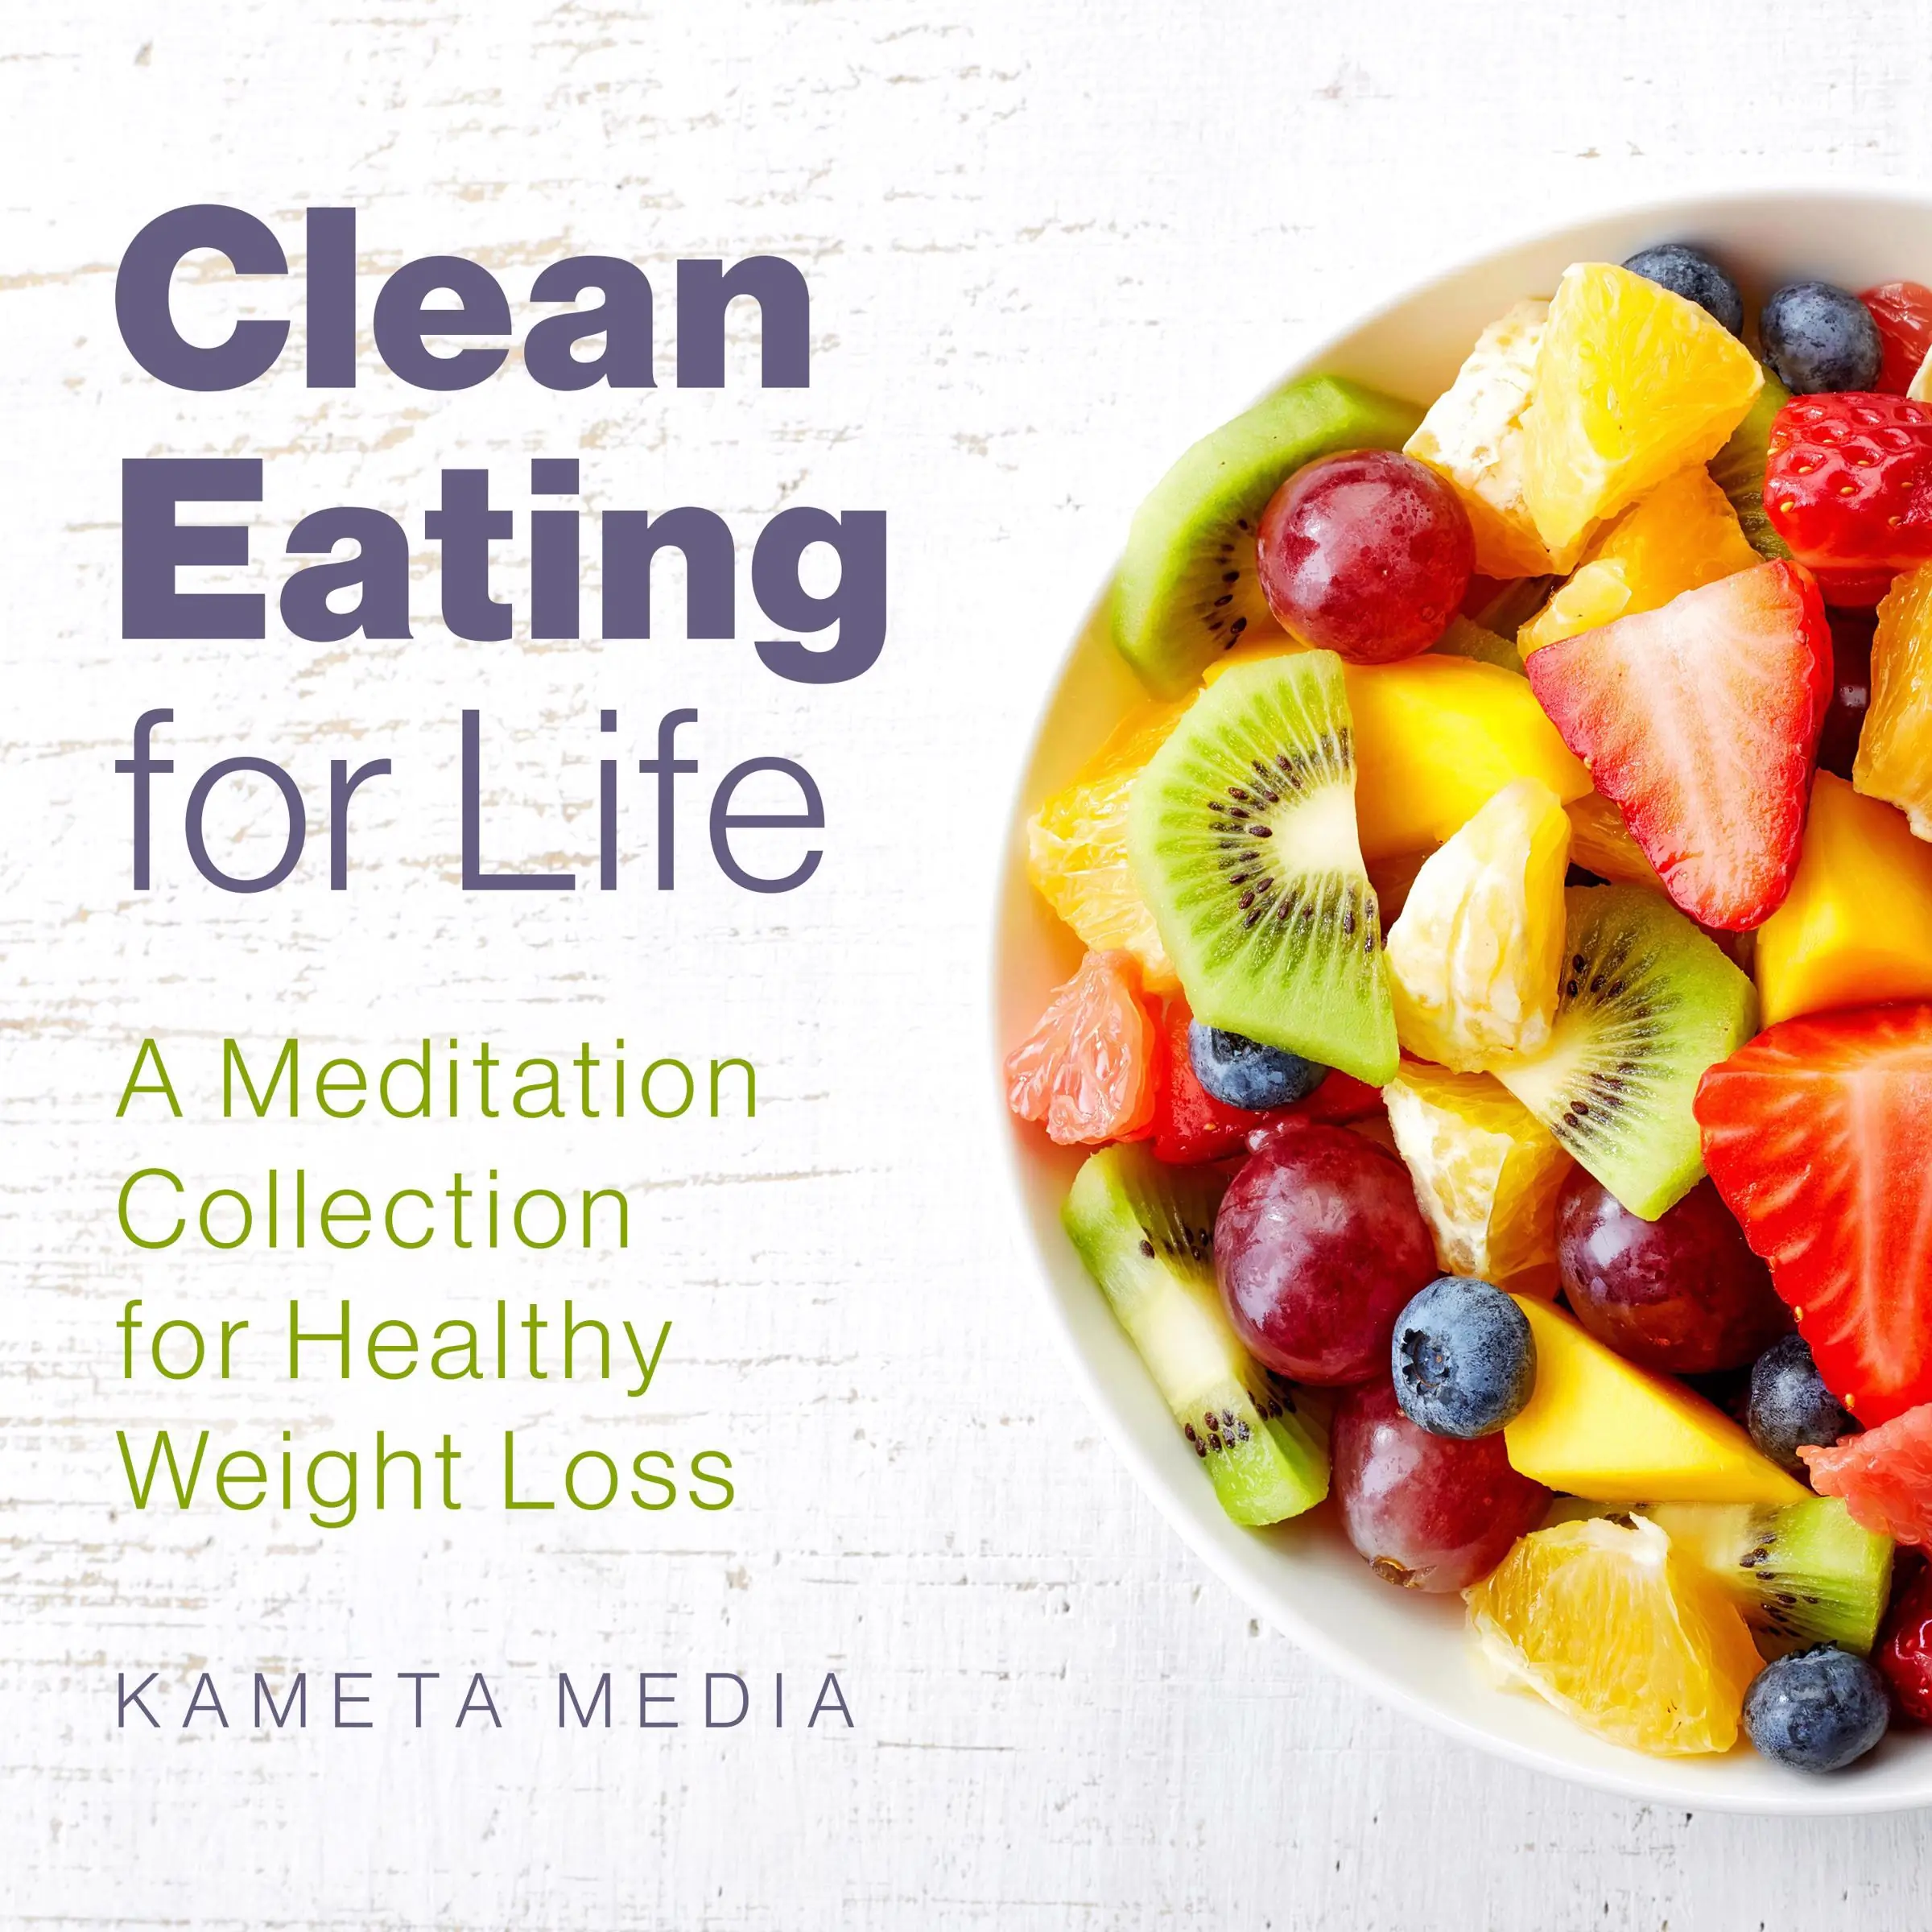 Clean Eating for Life: A Meditation Collection for Healthy Weight Loss Audiobook by Kameta Media